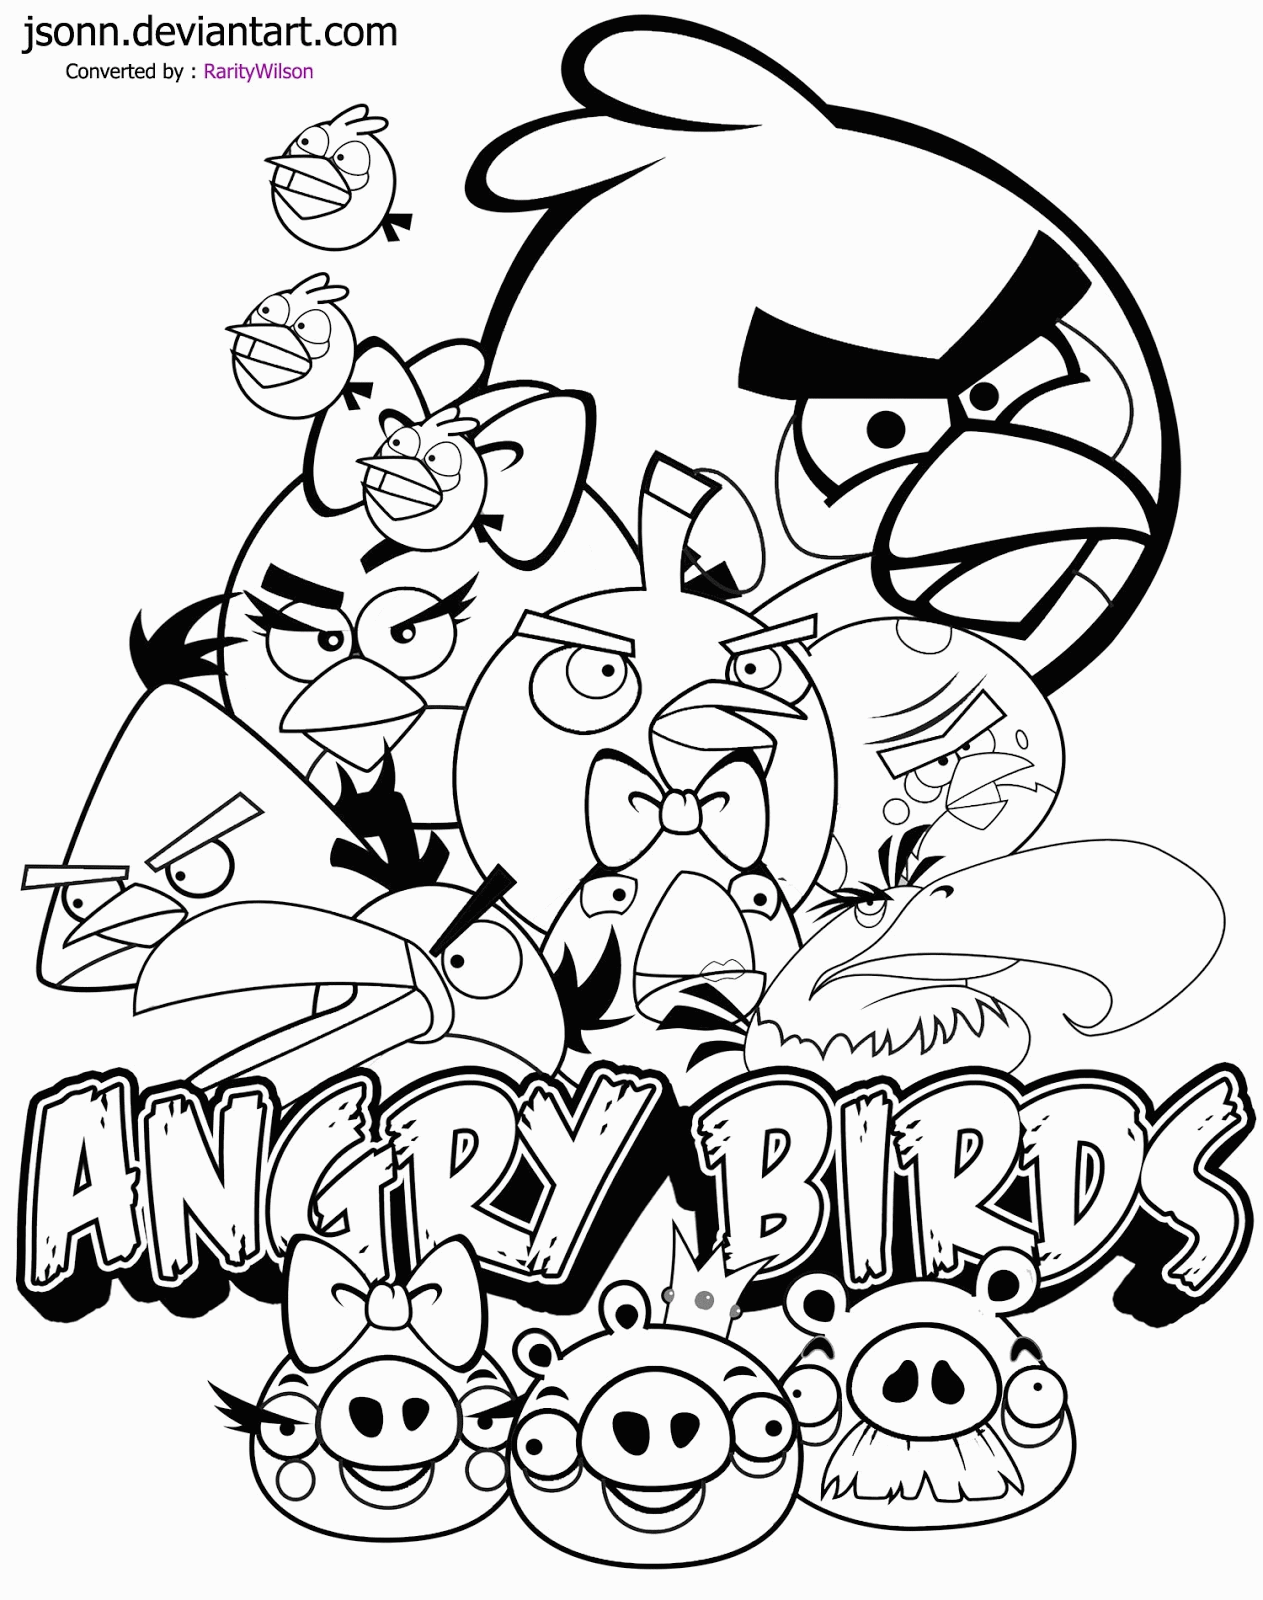 Angry Birds Black And White Coloring Pages - Coloring Pages For ...